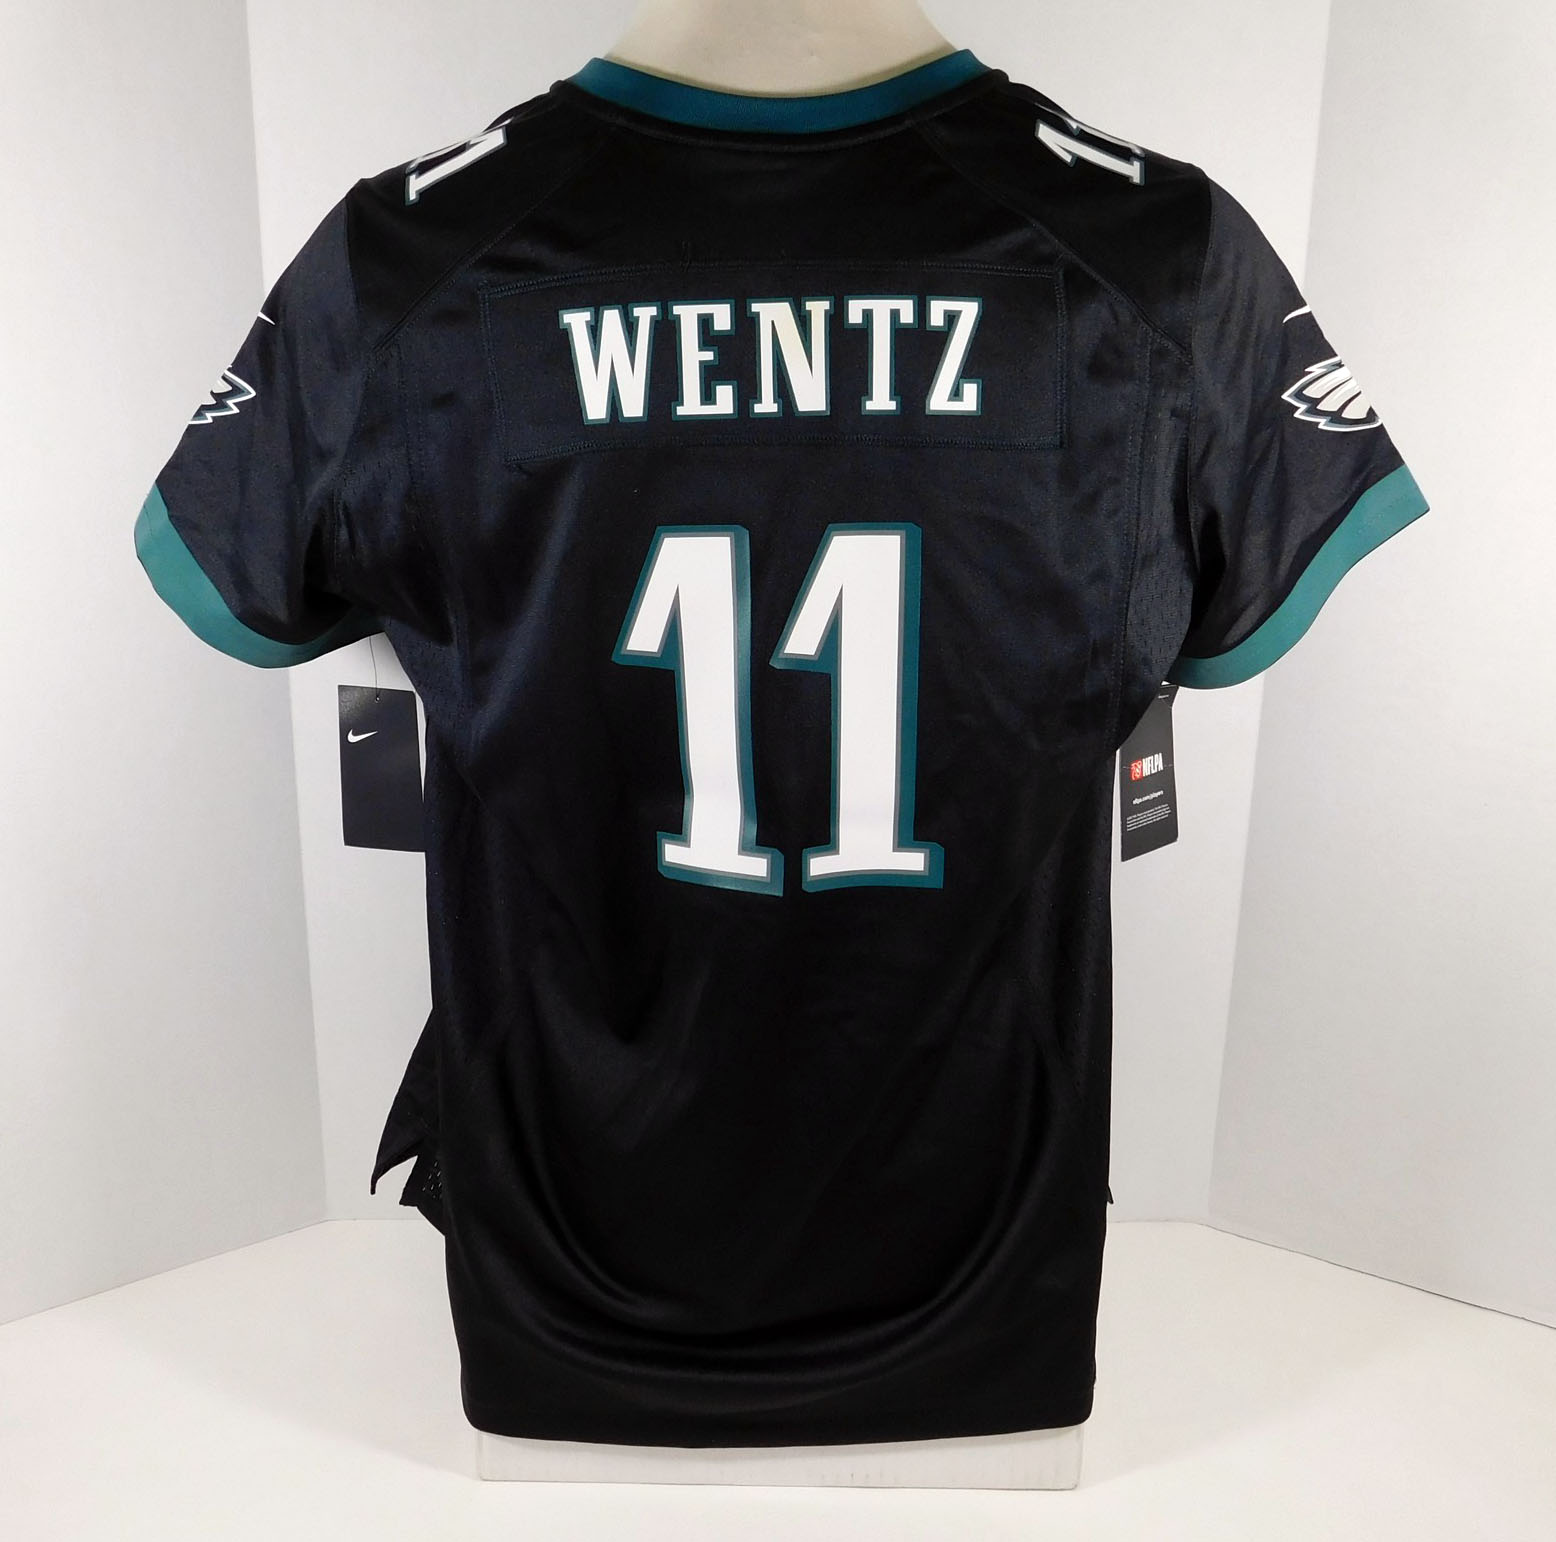 11 eagles jersey